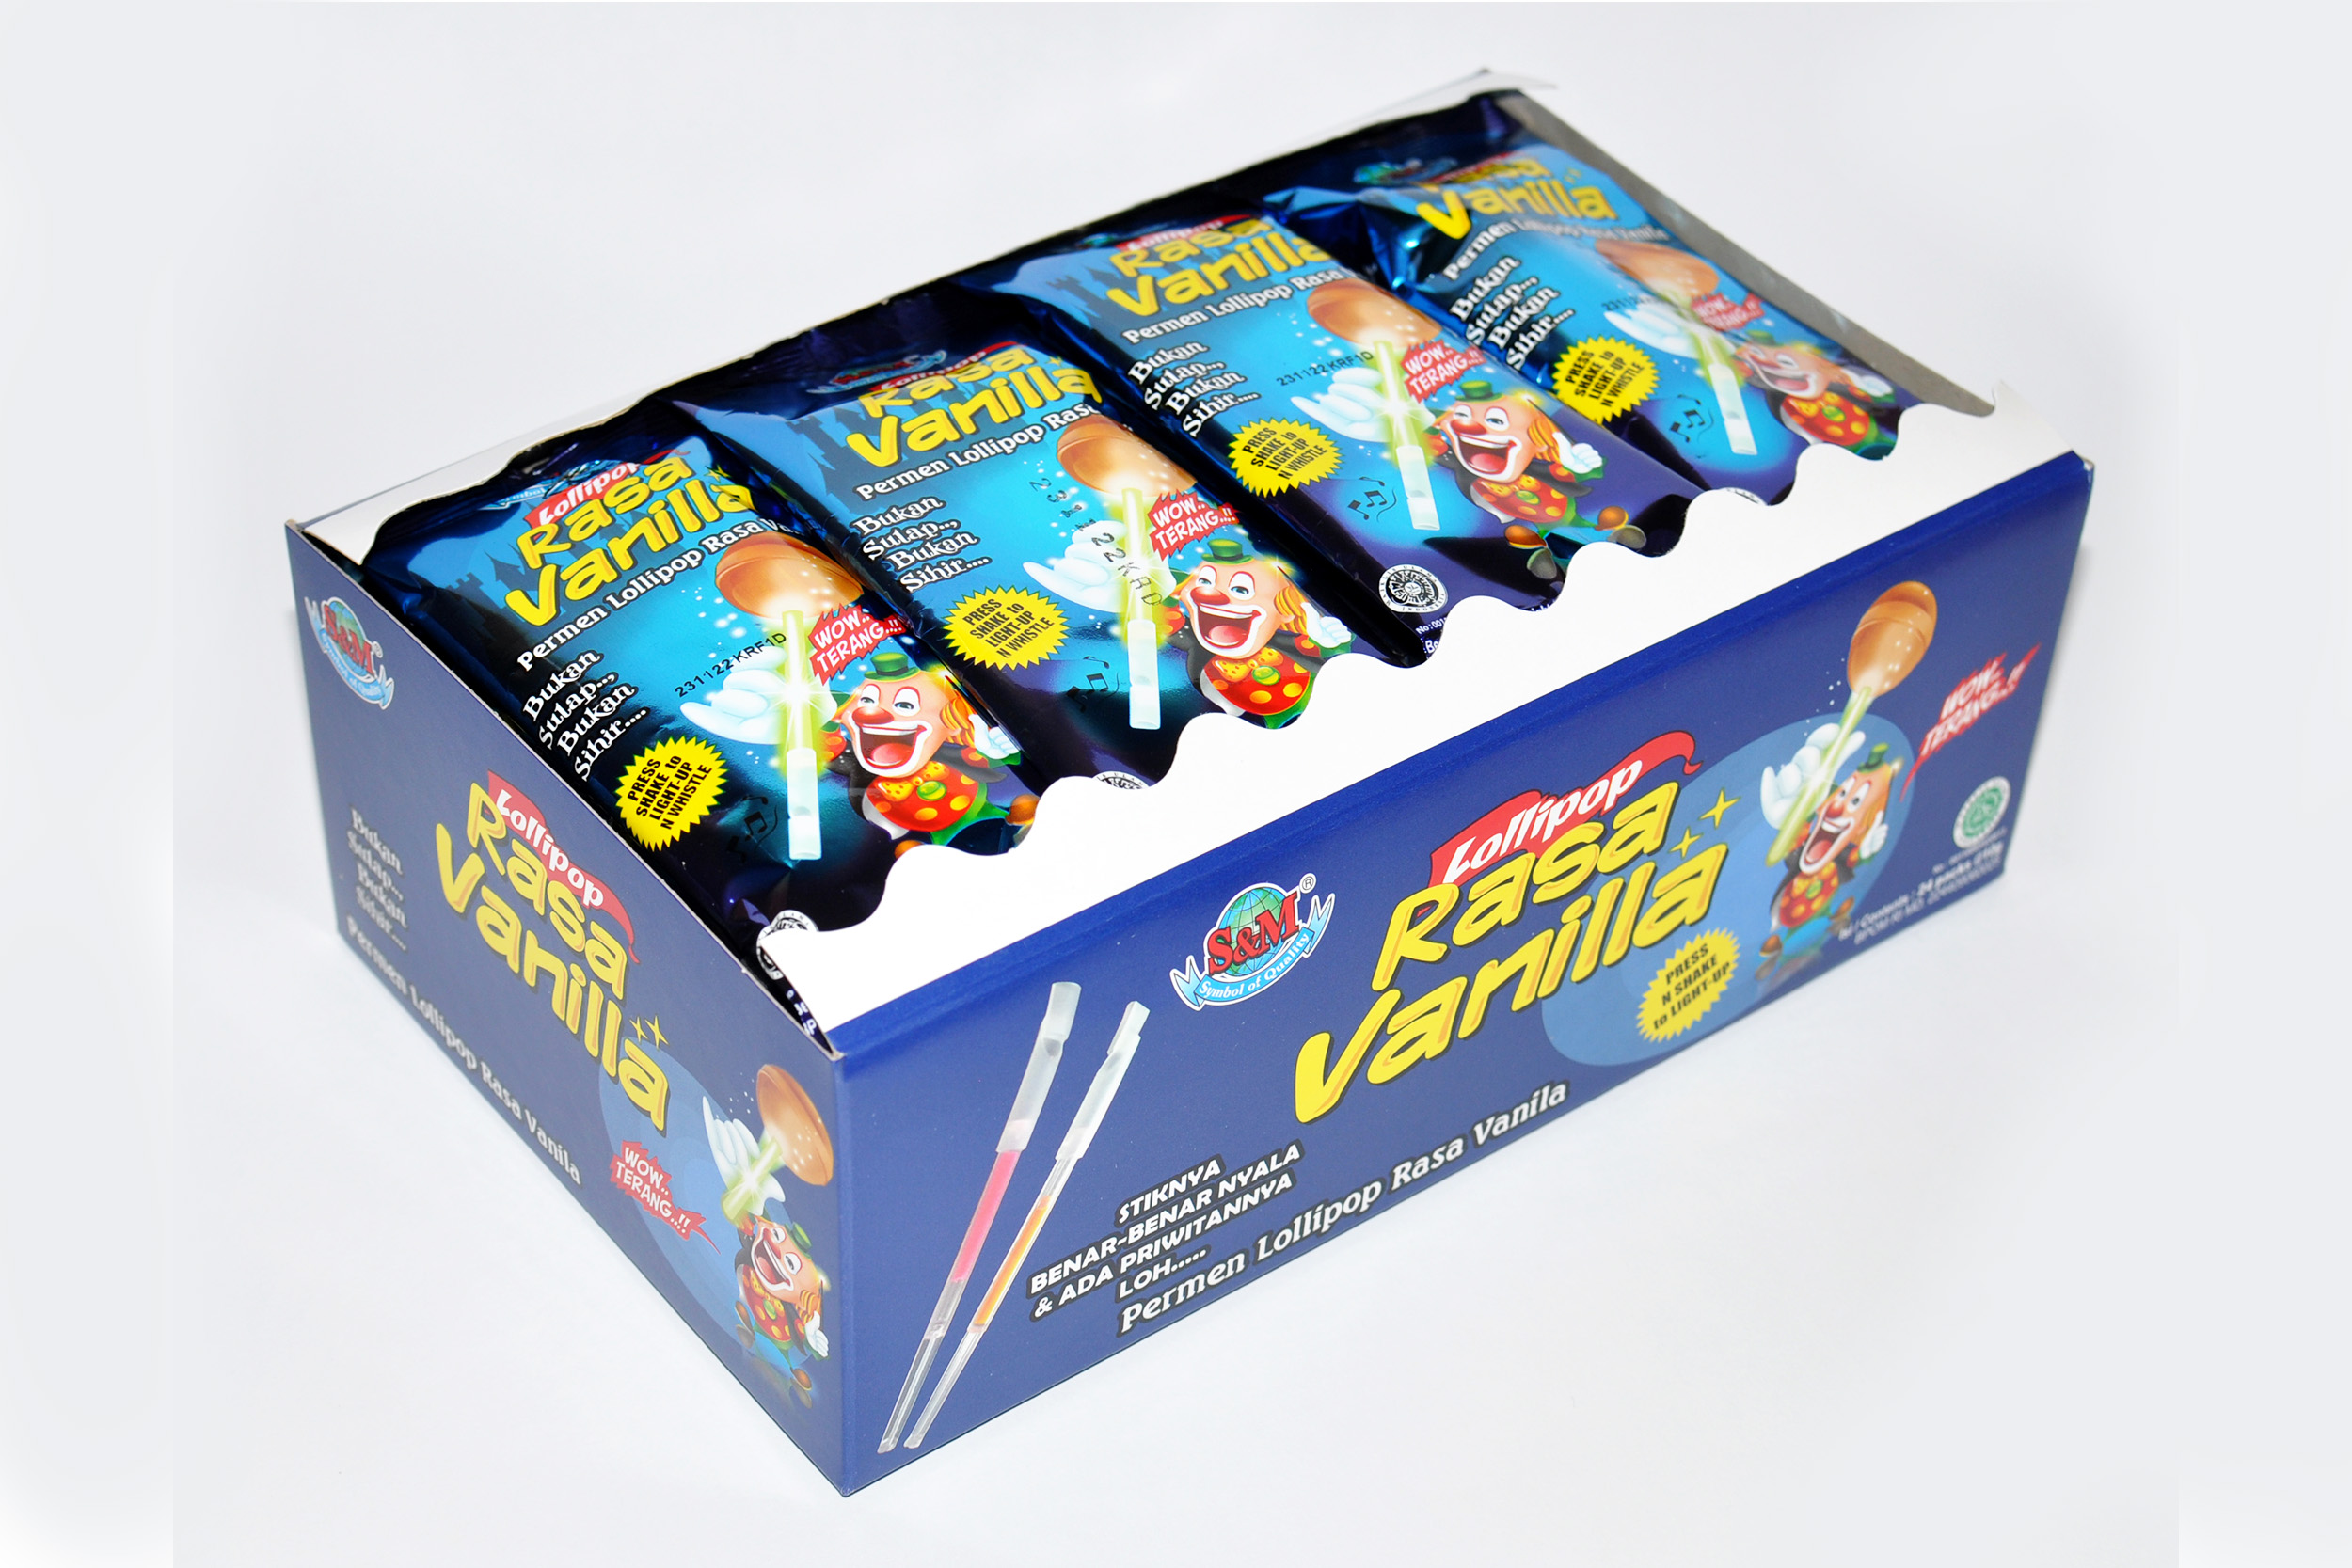 A Glowing, Eye-Catching Treat to Brighten Any Moment!  Deposit lollipops with vivid colours that come in two variants—S&M Vanilla Lollipop (Glowing Stick) and Magic Glow Lollipop (Glowing & Whistle Stick). Candy infused with a rich milk flavour profile and a lovely hint of vanilla to suit all palates. Irresistibly tempting, it is an eye-catching addition to your jar of sweets and is a perfect companion for fun-filled occasions such as birthday parties, gatherings, concerts, special traditions (Valentines, Halloween), festive seasons (Christmas and New Year), and many more.   It is made by special moulds through the deposit process to create a uniformed sized and shaped candy with a smooth surface finish that fits perfectly in the mouth. The soft fluorescence glow emitted by this playful, crowd-pleaser treat will brighten up your special moments and bring out a lot of fun! Ever since its breakthrough in the Indonesian market, it has been an instant hit with the kids and teens—and many fun-loving adults too!  The glowing stick is made from high quality, non-toxic material, making it completely safe for children. Because of its sturdiness, it is bendable without breaking, thus preventing the chemical substance from leaking out.  Magic Glow/S&M Vanilla Lollipop is manufactured by PT. Internusa Food, a modern and innovative confectionery and candy manufacturer in Indonesia with longstanding tradition of excellence. Competitively-priced to cater the middle-low market segments, PT. Internusa Food has produced well-known brands loved by the Indonesian customers and overseas markets over the years. The Company’s products have been exported to many countries in Southeast Asia, Asia Pacific, U.S.A, the Middle East and Africa. Its high-quality products follows the ISO 22000:2005 Food Safety Management System and the Indonesian Food and Drug Monitoring Agency (BPOM). All products are also Halal-certified by Indonesian Ulama Council (MUI). Magic Glow/S&M Vanilla Lollipop is available for bulk purchasing with B2B wholesale price.   Package content:  - S&M Vanilla Lollipop (Glowing Stick): 20bags @20pcs @8g  - Magic Glow Lollipop (Glowing & Whistle Stick): 12boxes @24pcs @12g